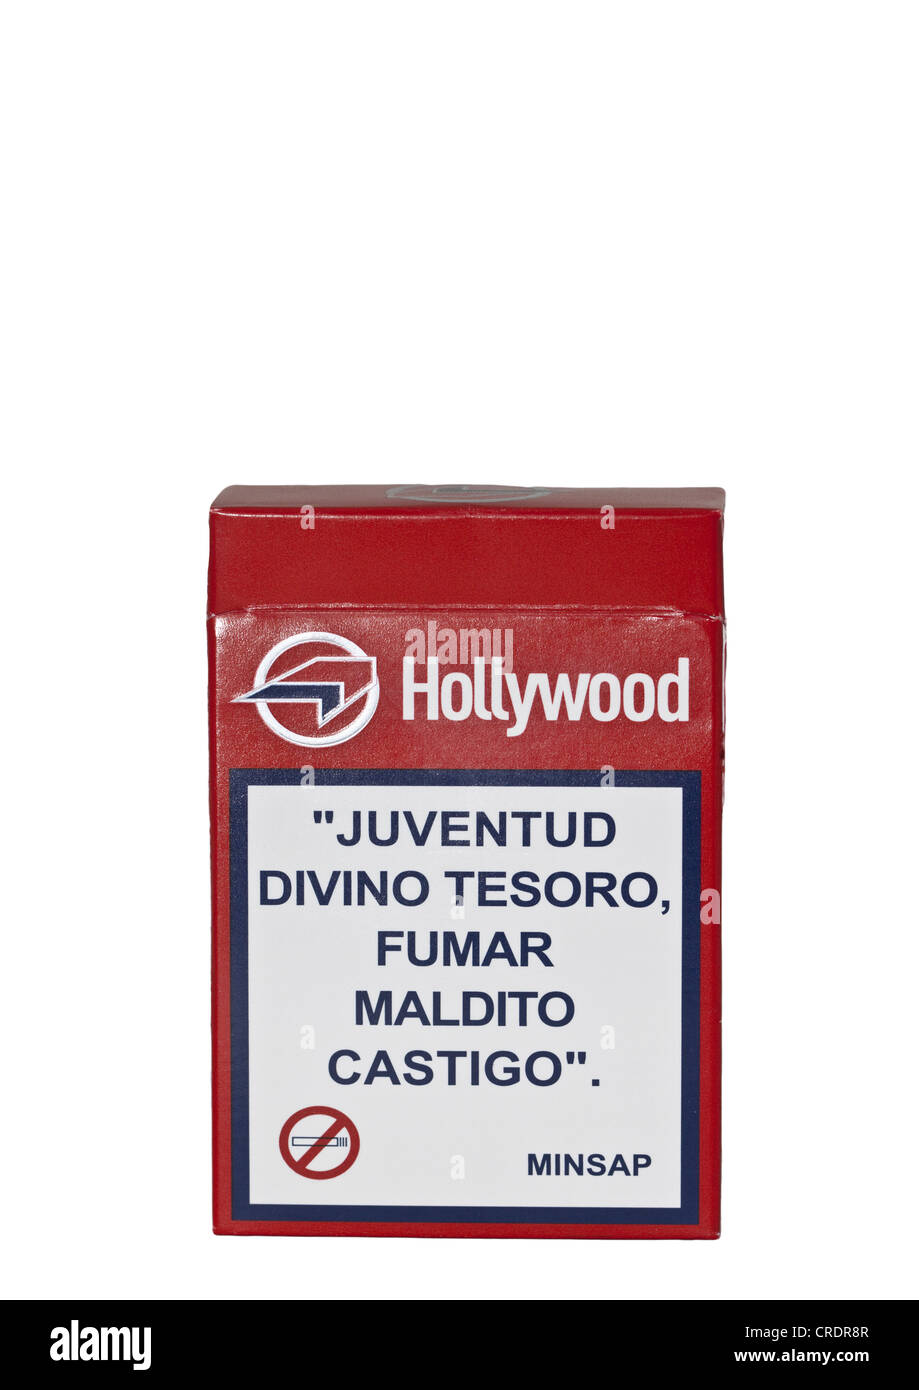 Cuban brand of cigarettes, Hollywood, with a health warning in Spanish Stock Photo